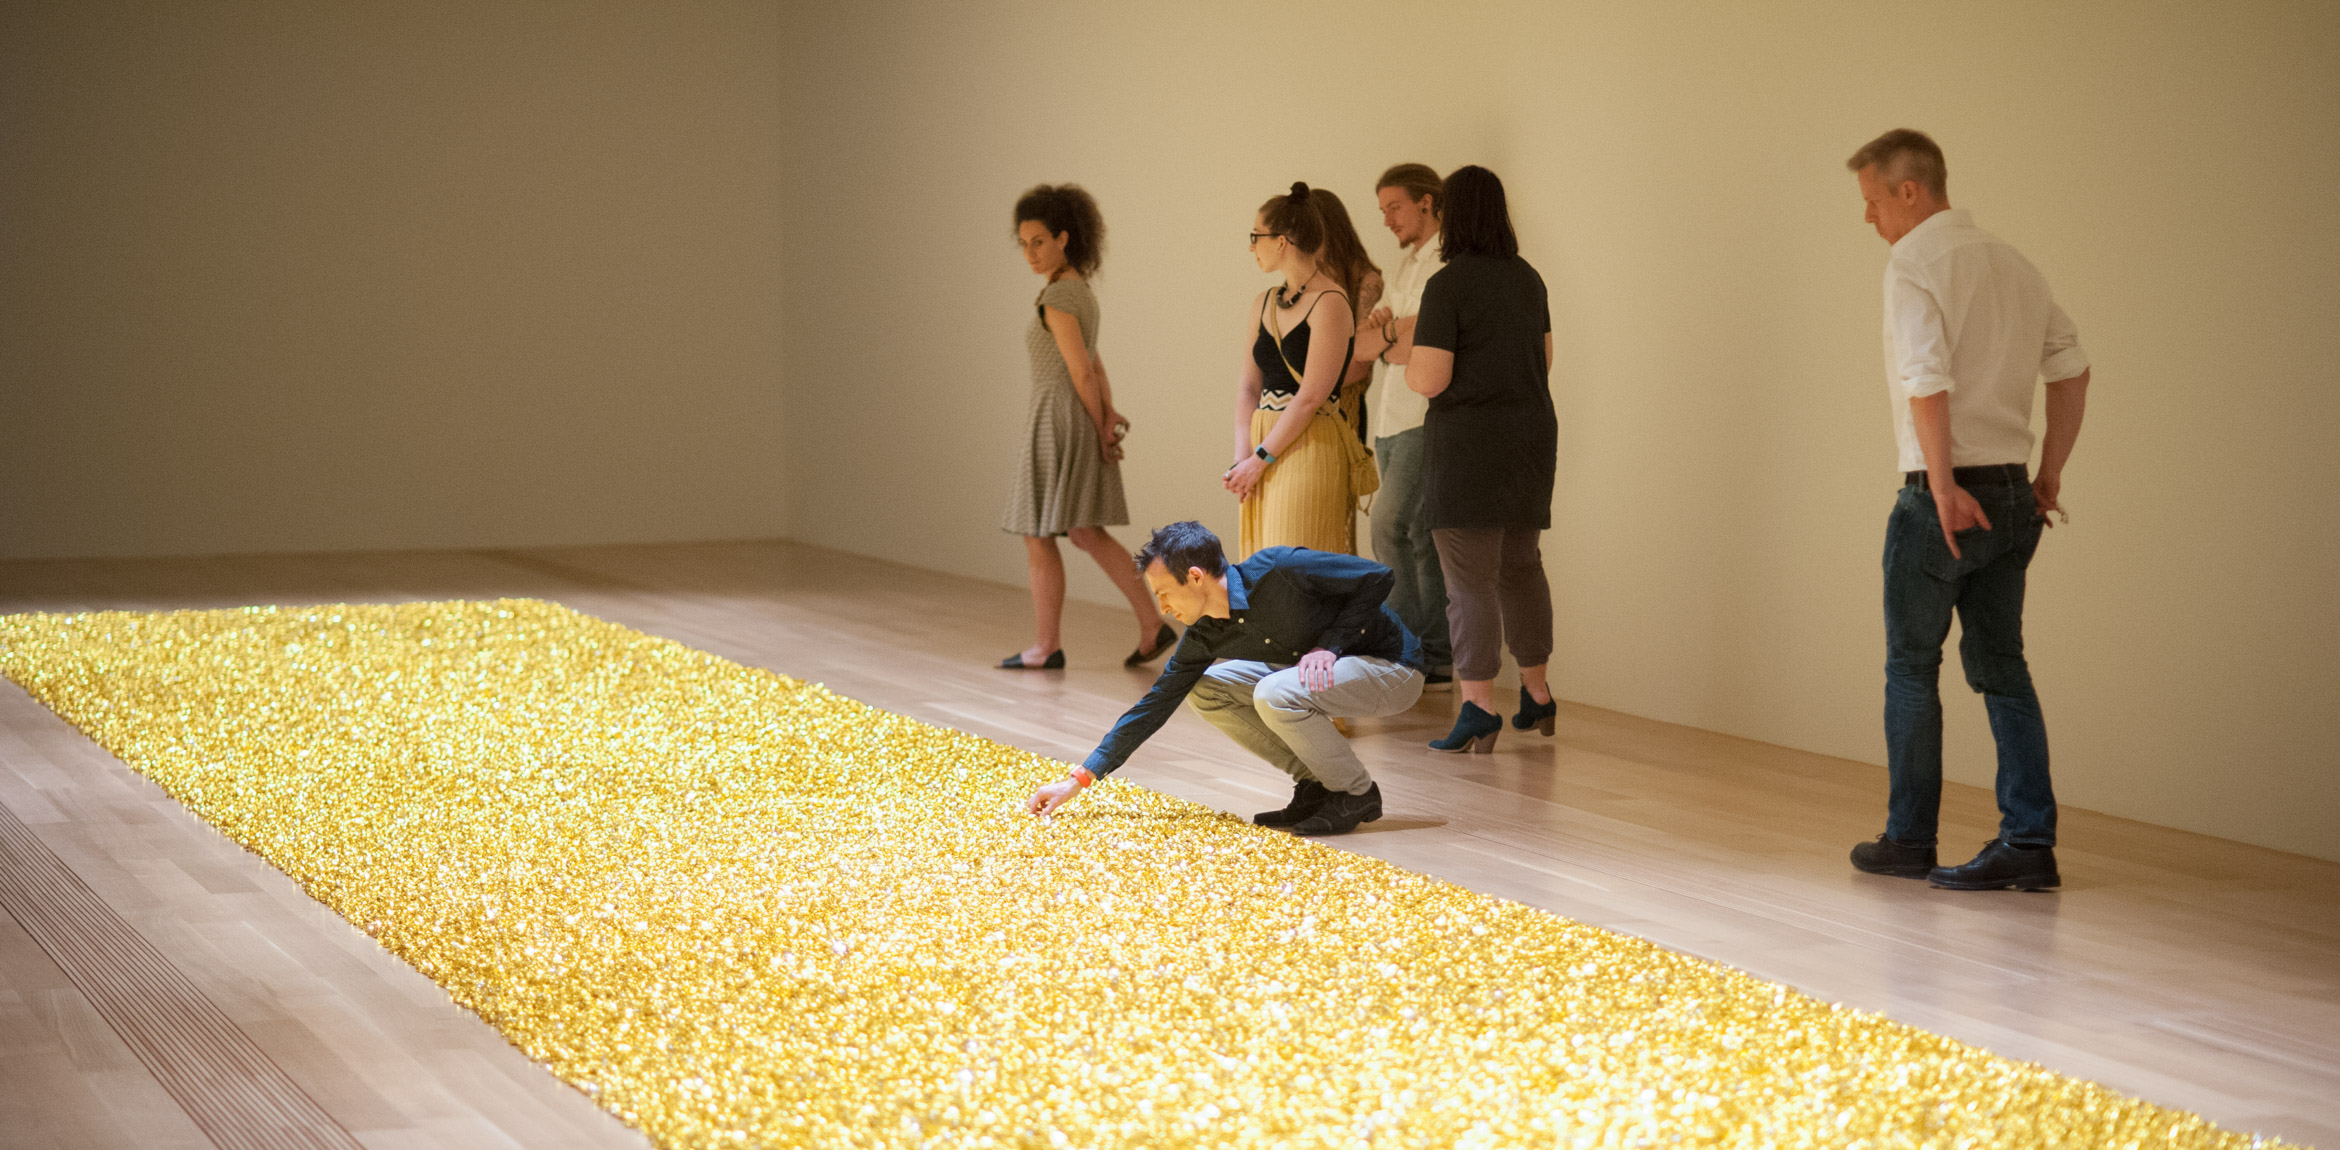 Visitors gather in the Lower East Gallery around a shimmering golden carpet of wrapped candies, an installation piece by Felix Gonzalez-Torres titled 